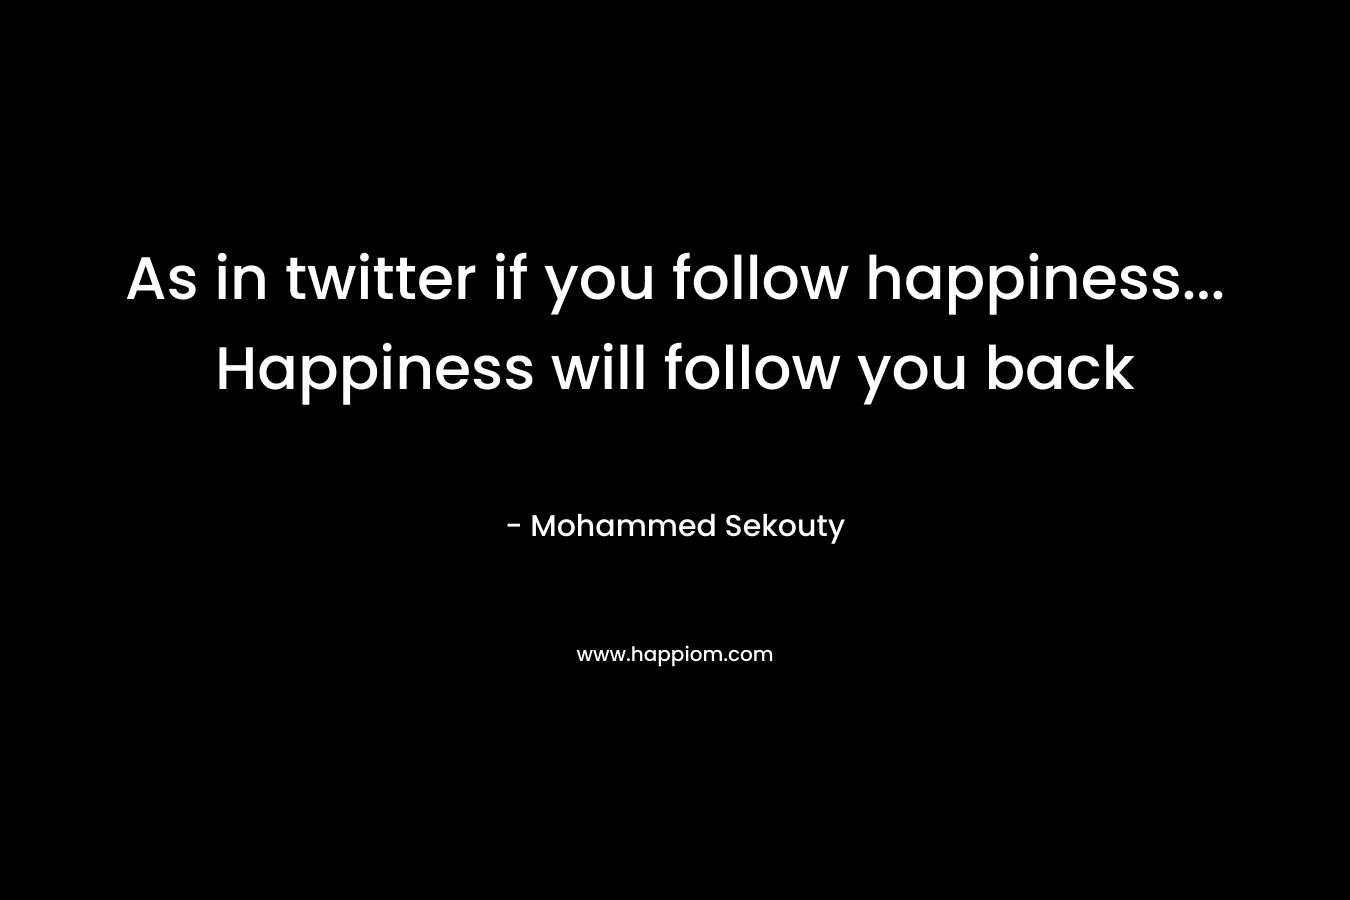 As in twitter if you follow happiness... Happiness will follow you back